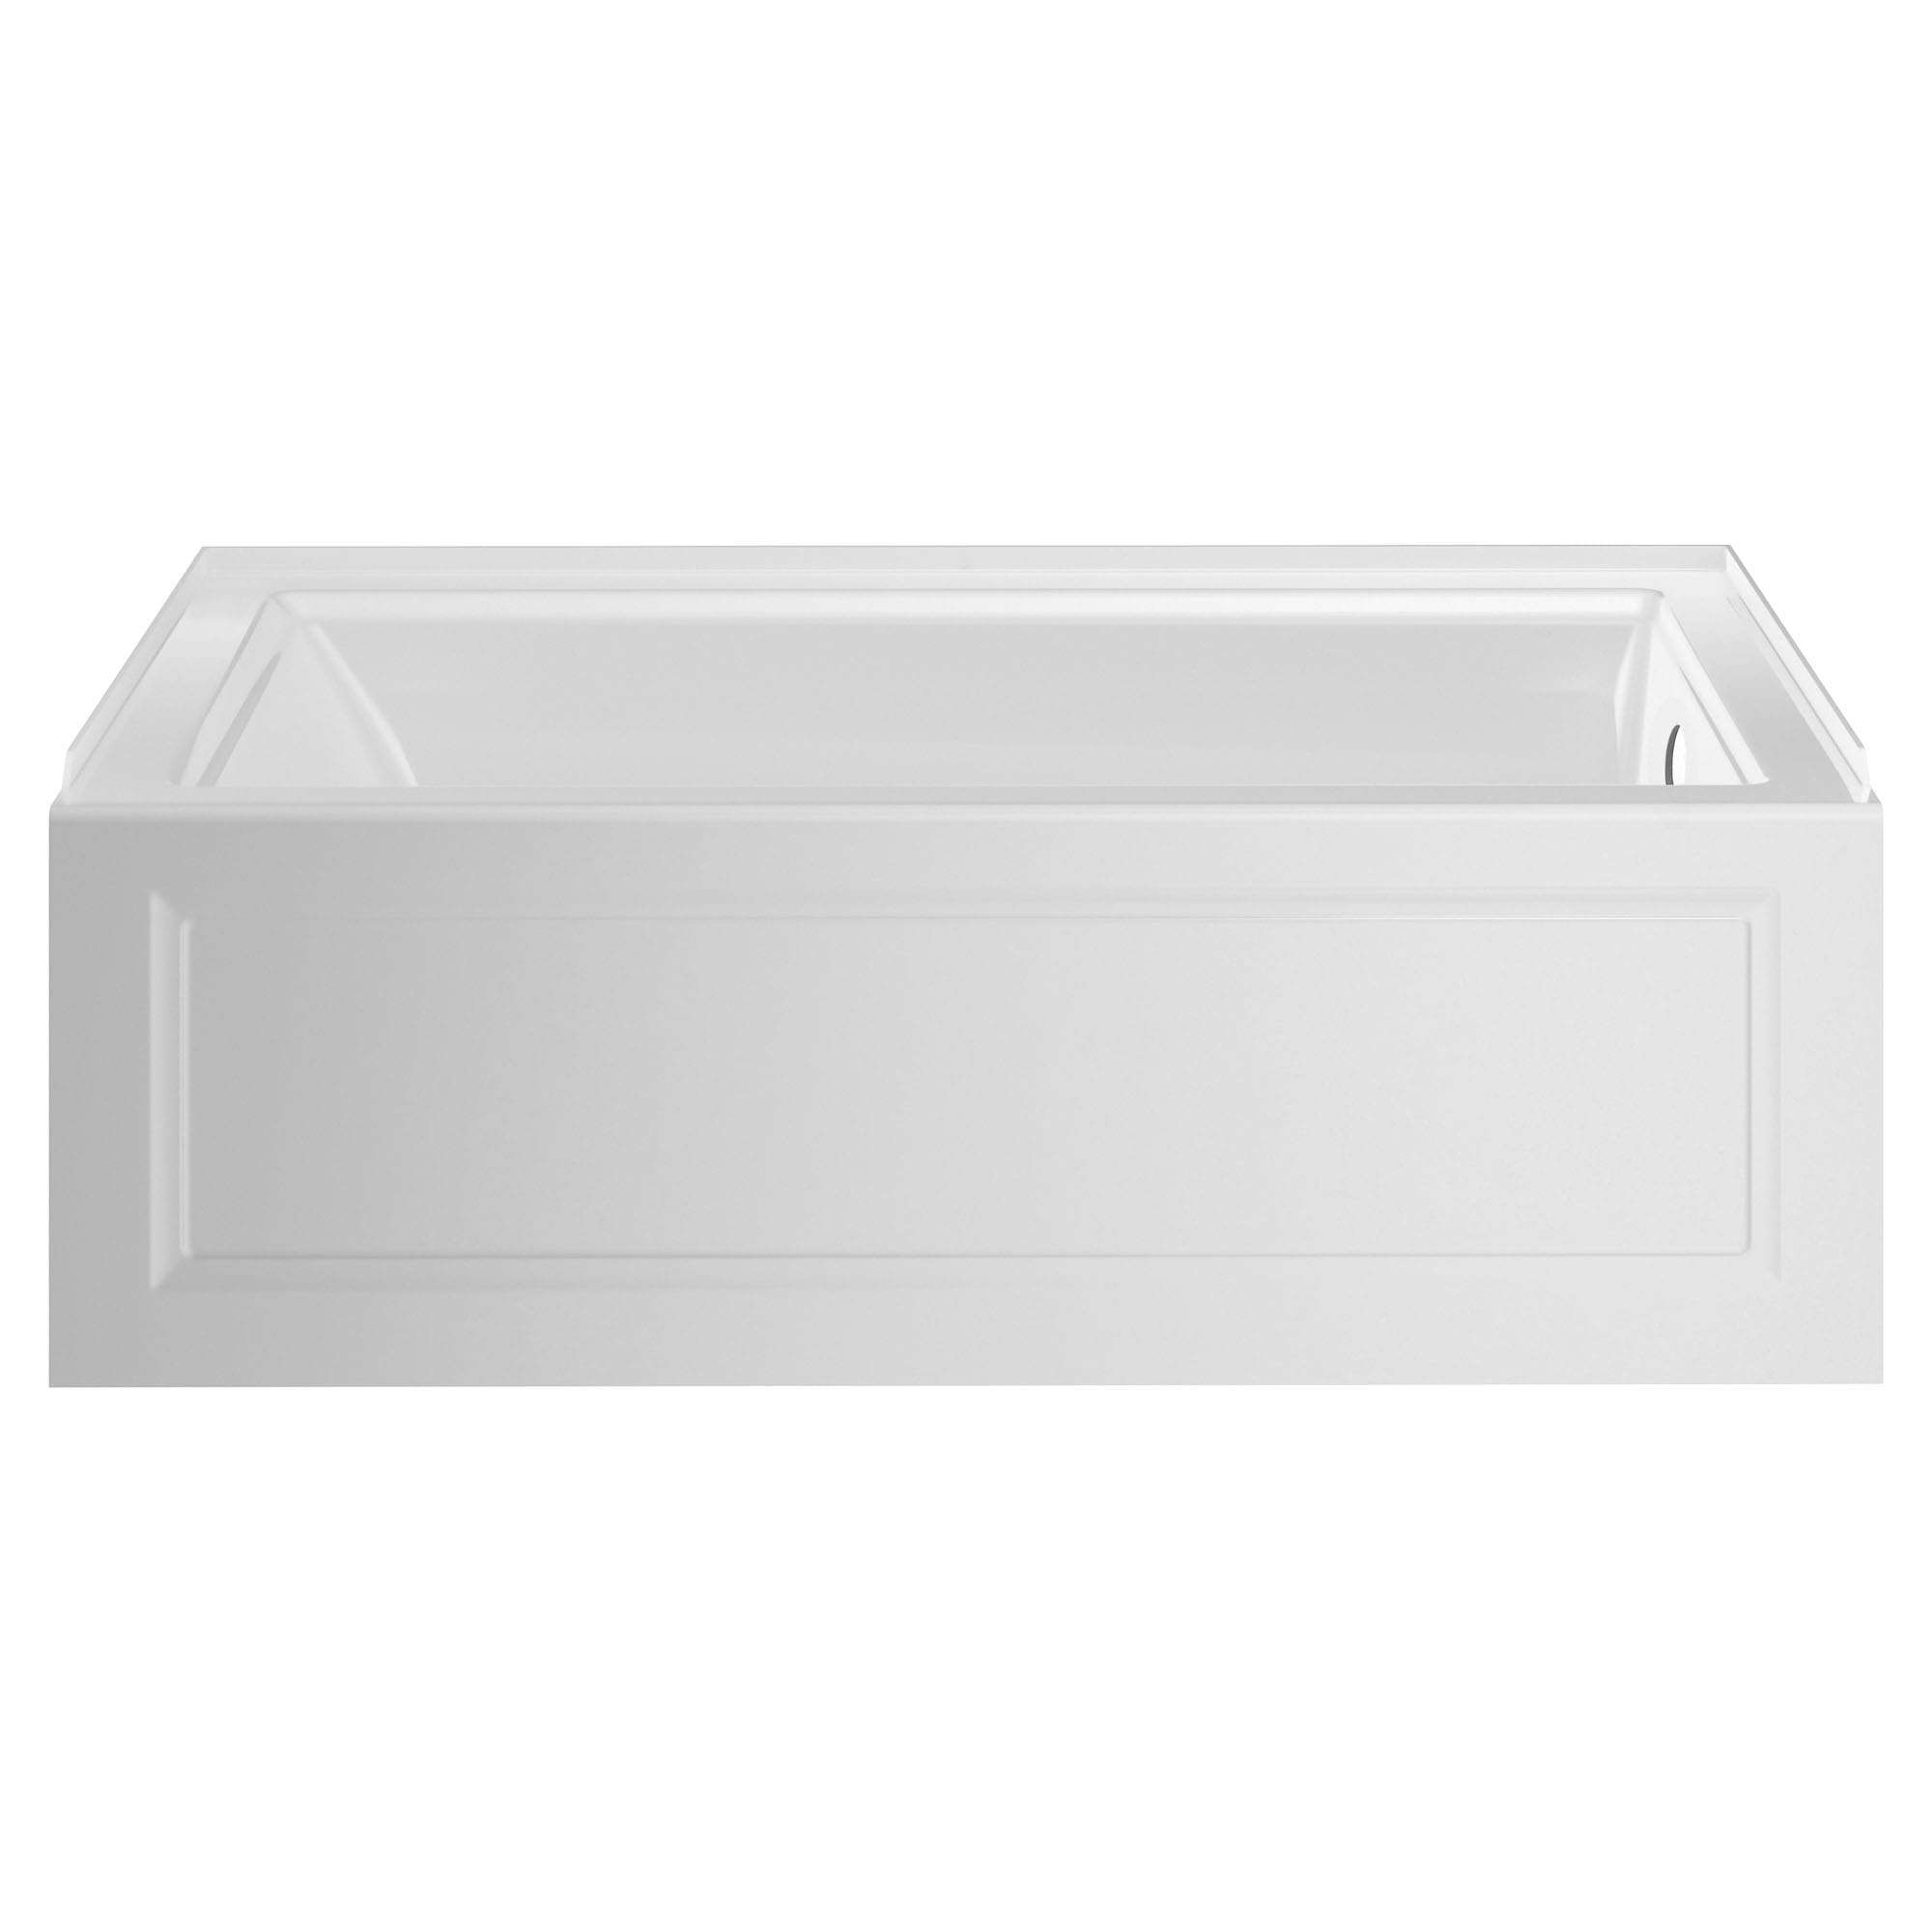 Town Square® S 60 x 32-Inch Integral Apron Bathtub With Right-Hand Outlet